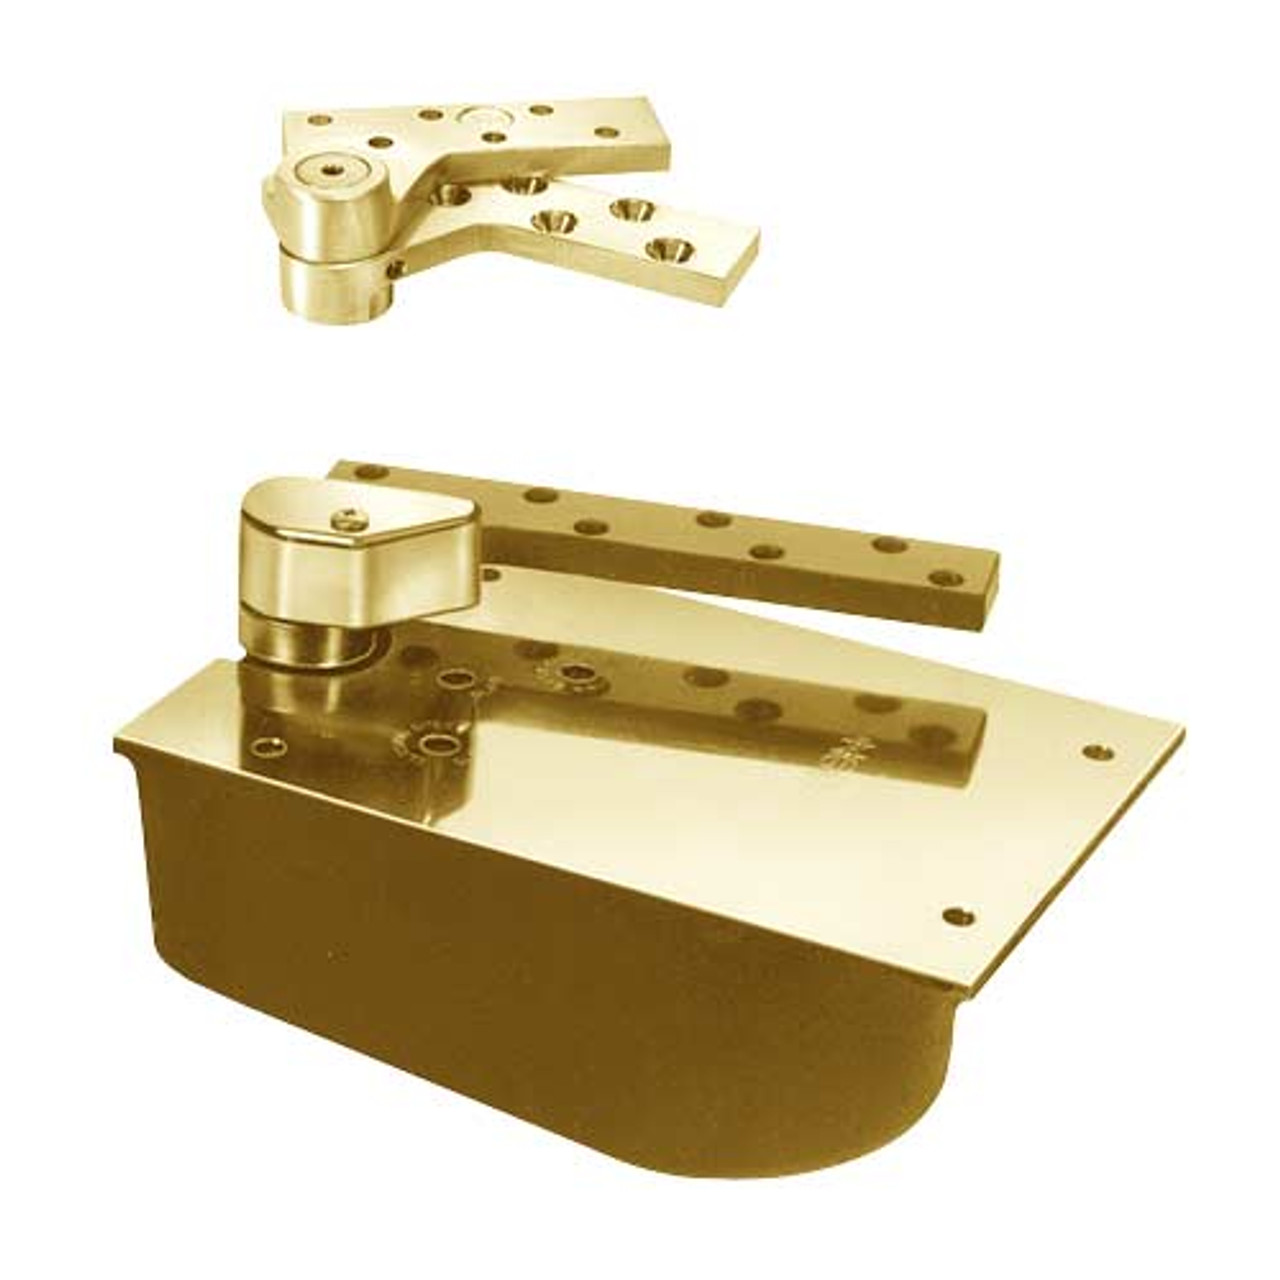 L27-105N-CWF-RH-605 Rixson 27 Series Extra Heavy Duty Lead Lined Offset Floor Closer in Bright Brass Finish